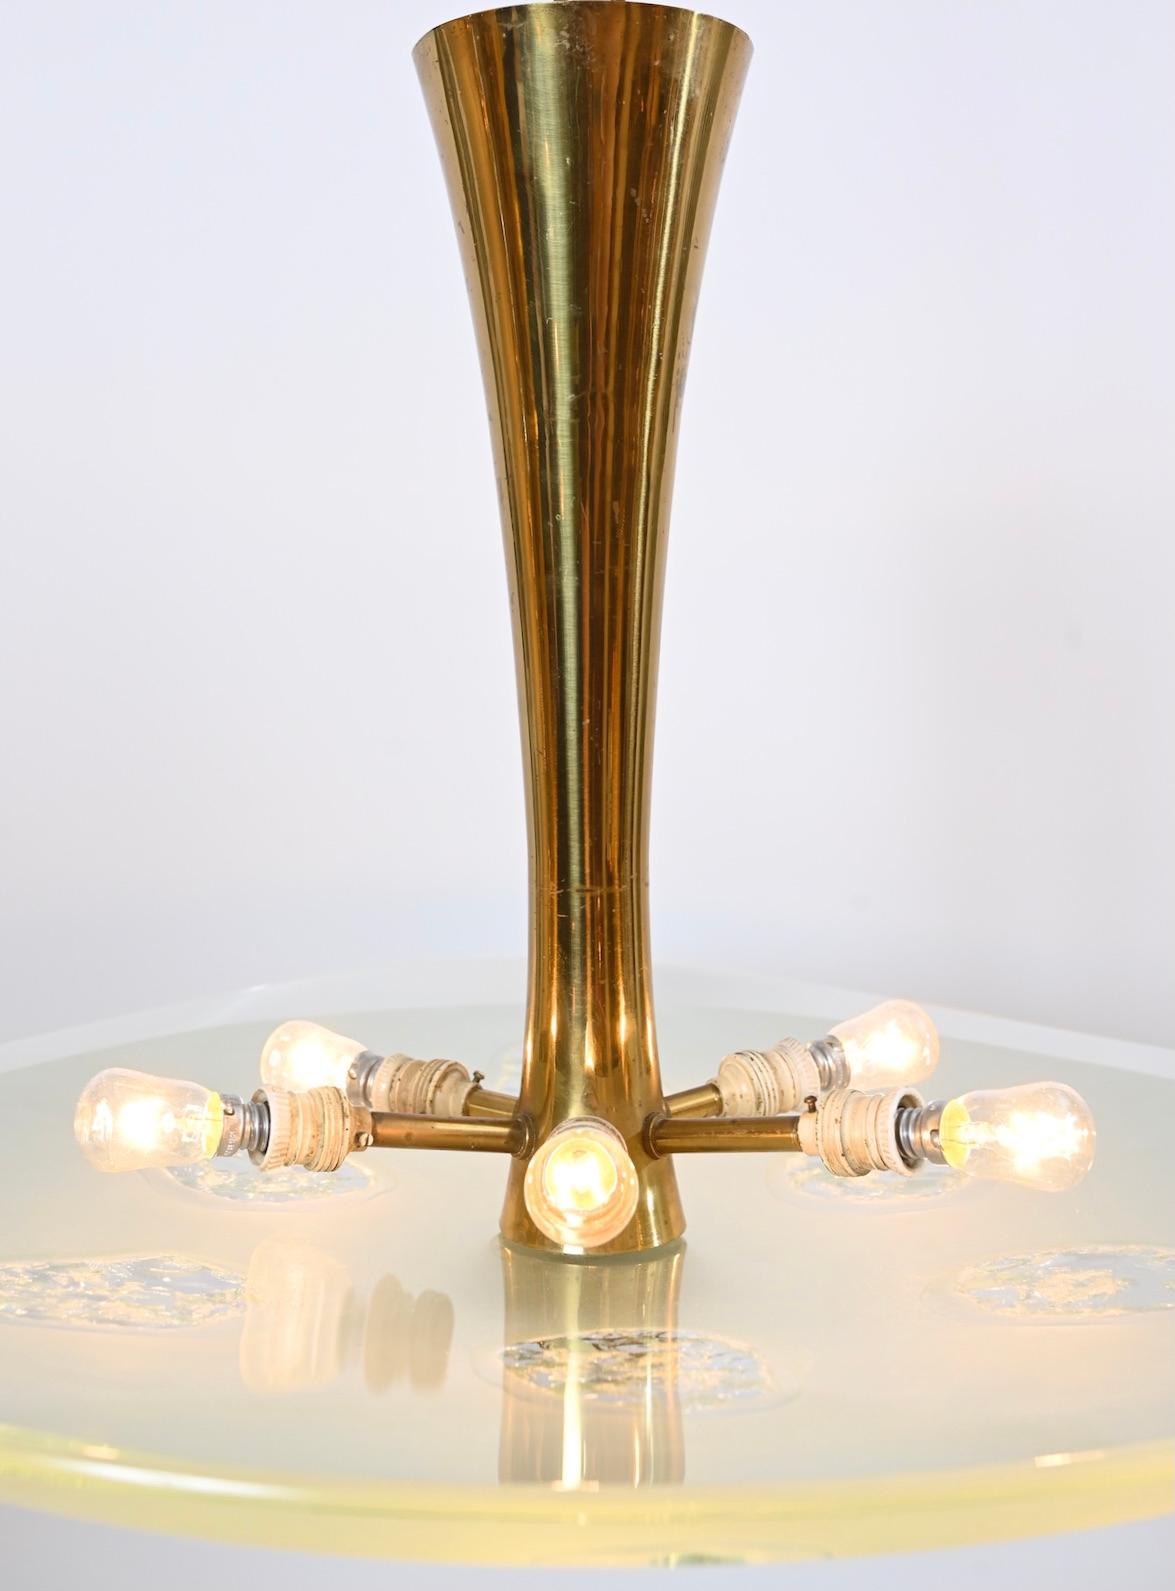 Brass '1748' Model Ceiling Light by Max Ingrand and Dubé for Fontana Arte, Italy, 1957 For Sale